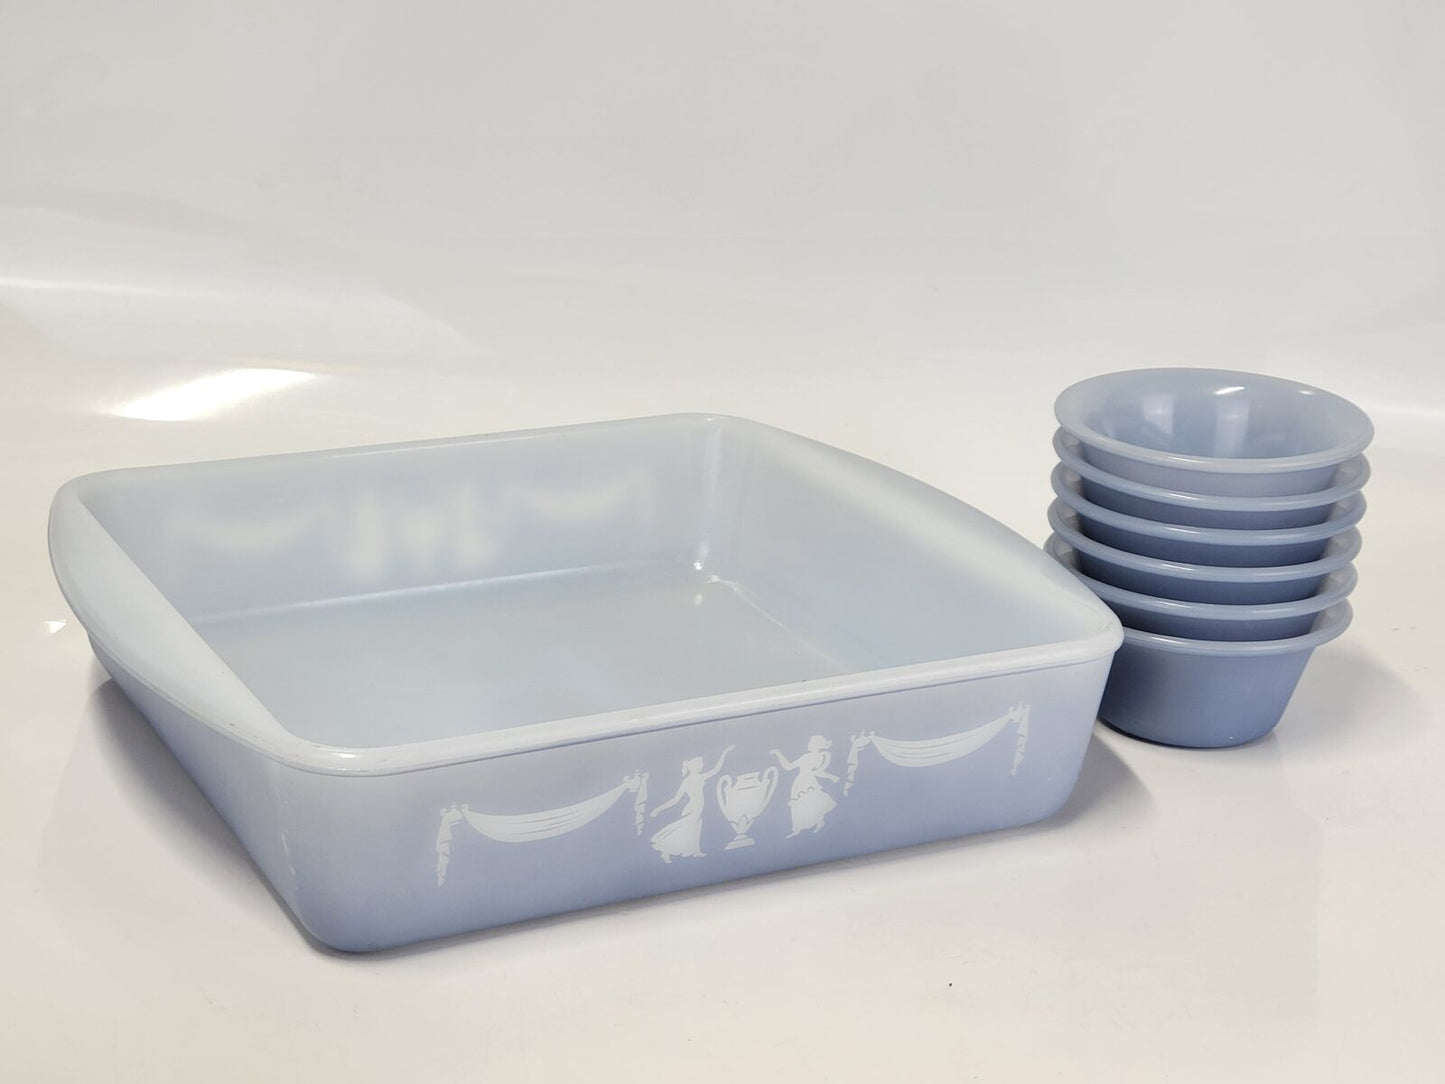 VINTAGE GLASBAKE J-247 BAKING DISH & 286 Mini Bowls Blue With Design MADE IN USA